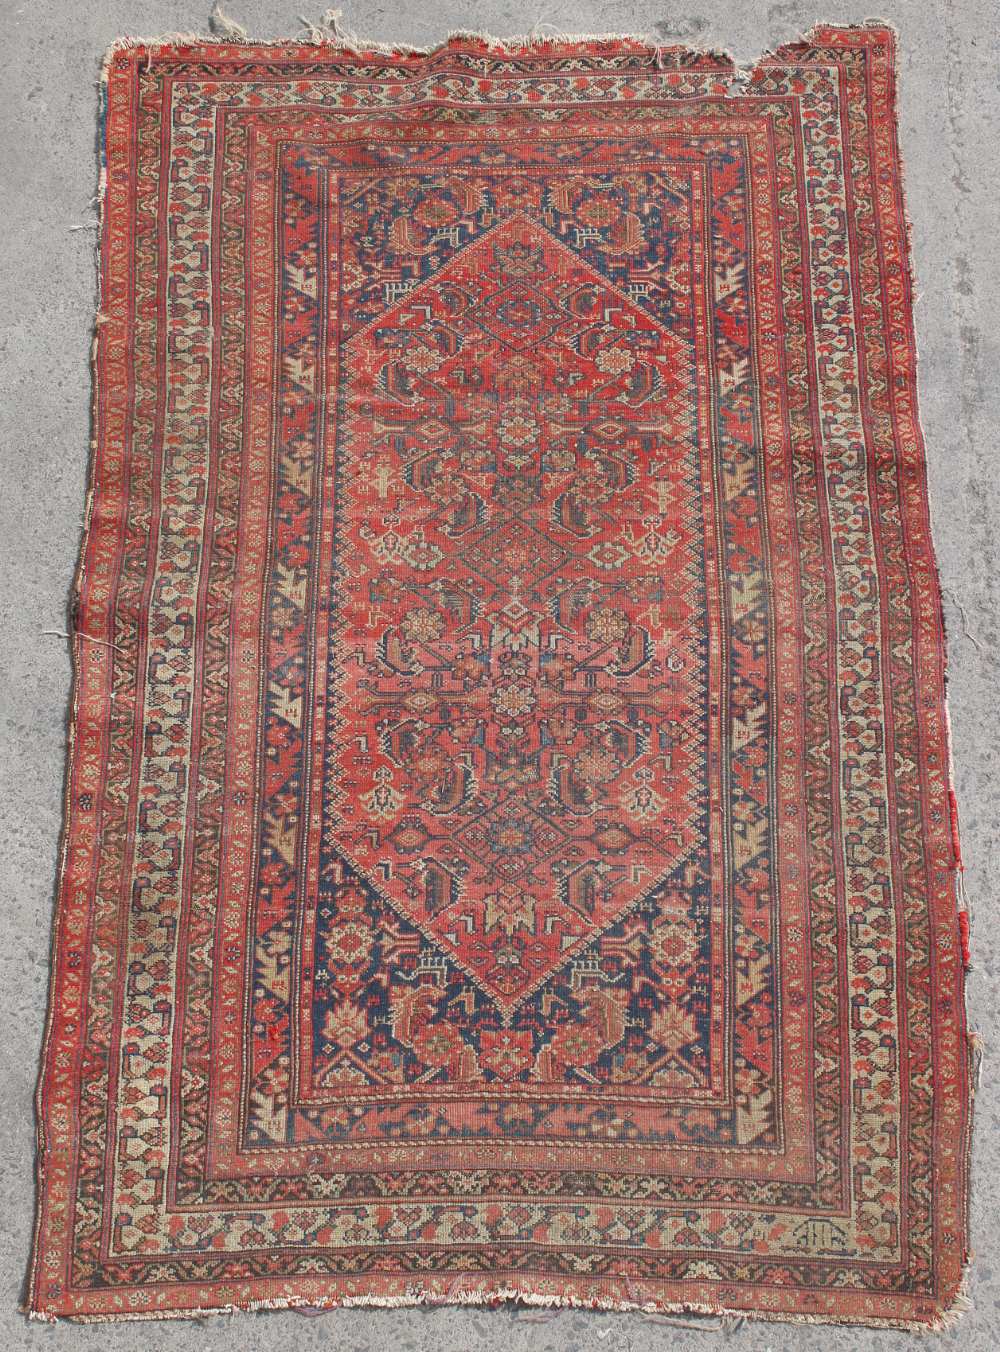 Property of a gentleman - an early 20th century Persian Qashgai rug, decorated with animal figures